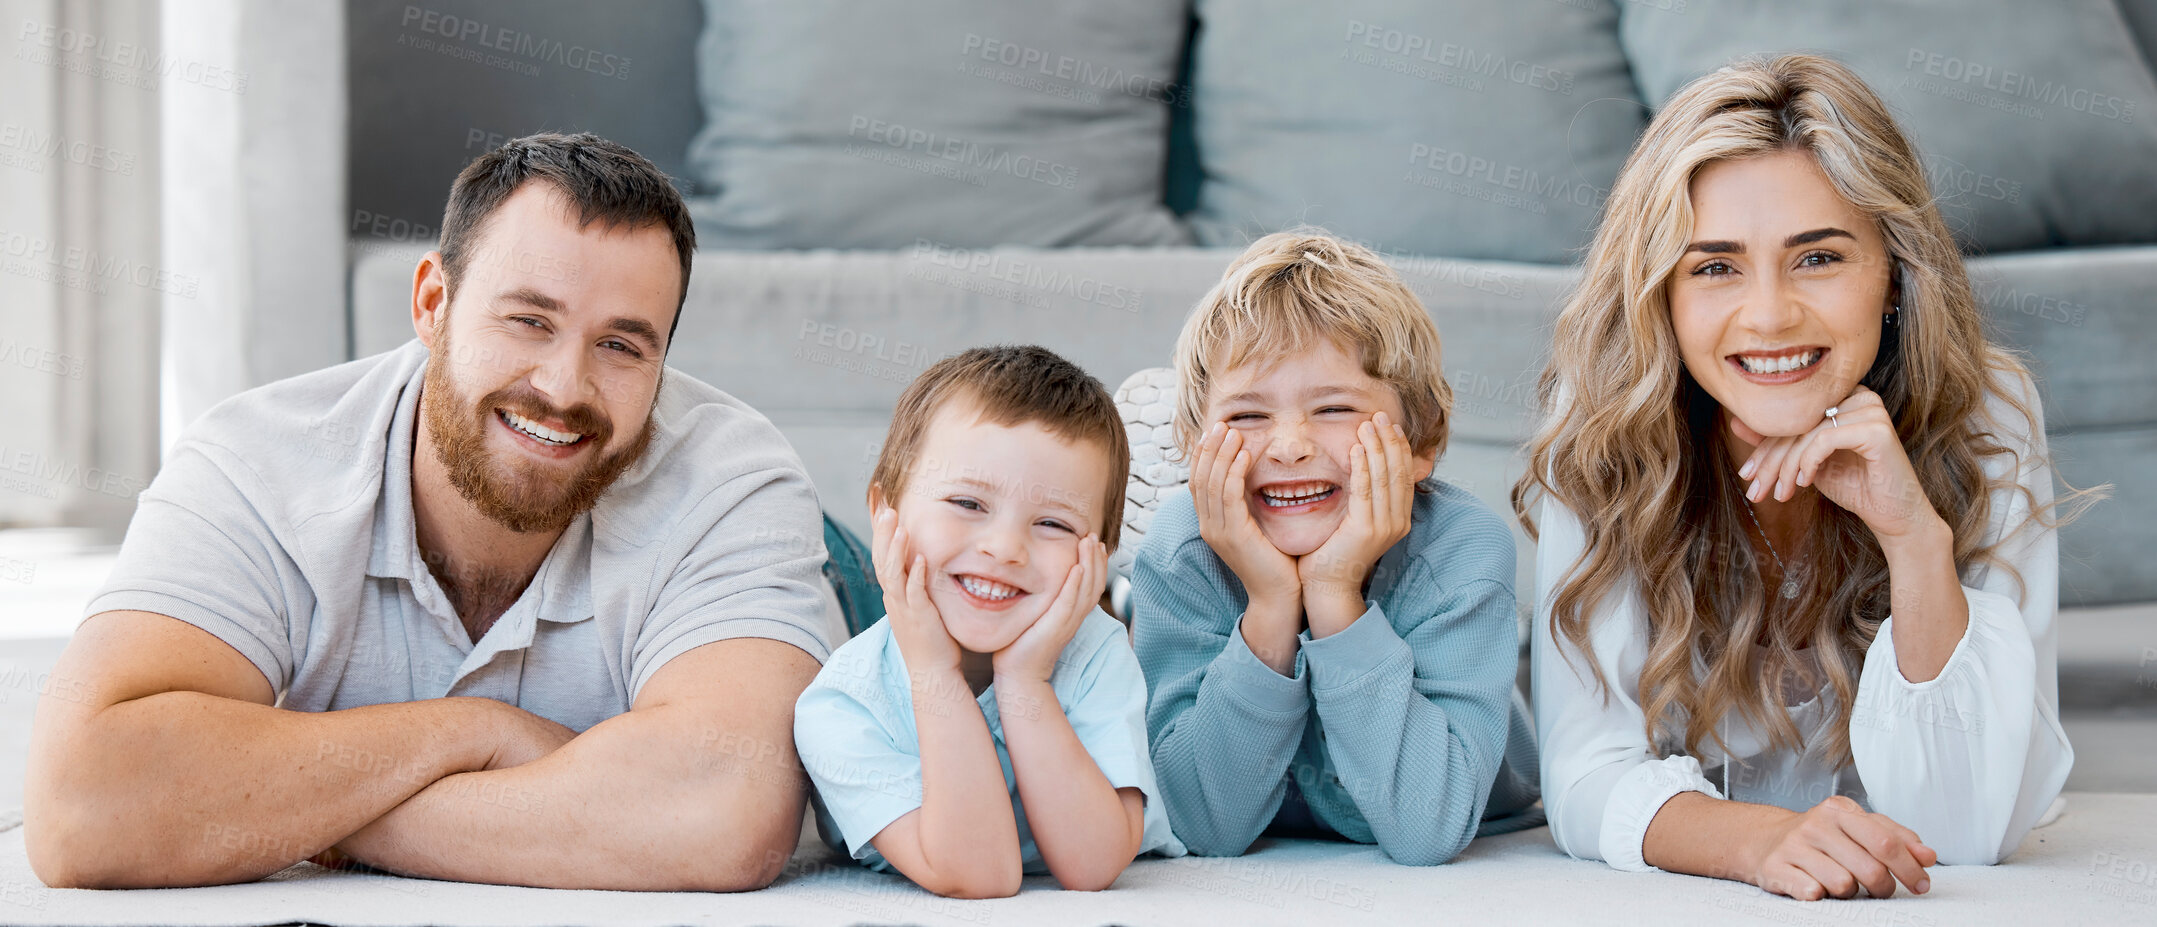 Buy stock photo Portrait of smiling caucasian family of four lying and relaxing on the floor at home. Carefree loving parents bonding with cute little sons. Playful young boys spending quality time with mom and dad